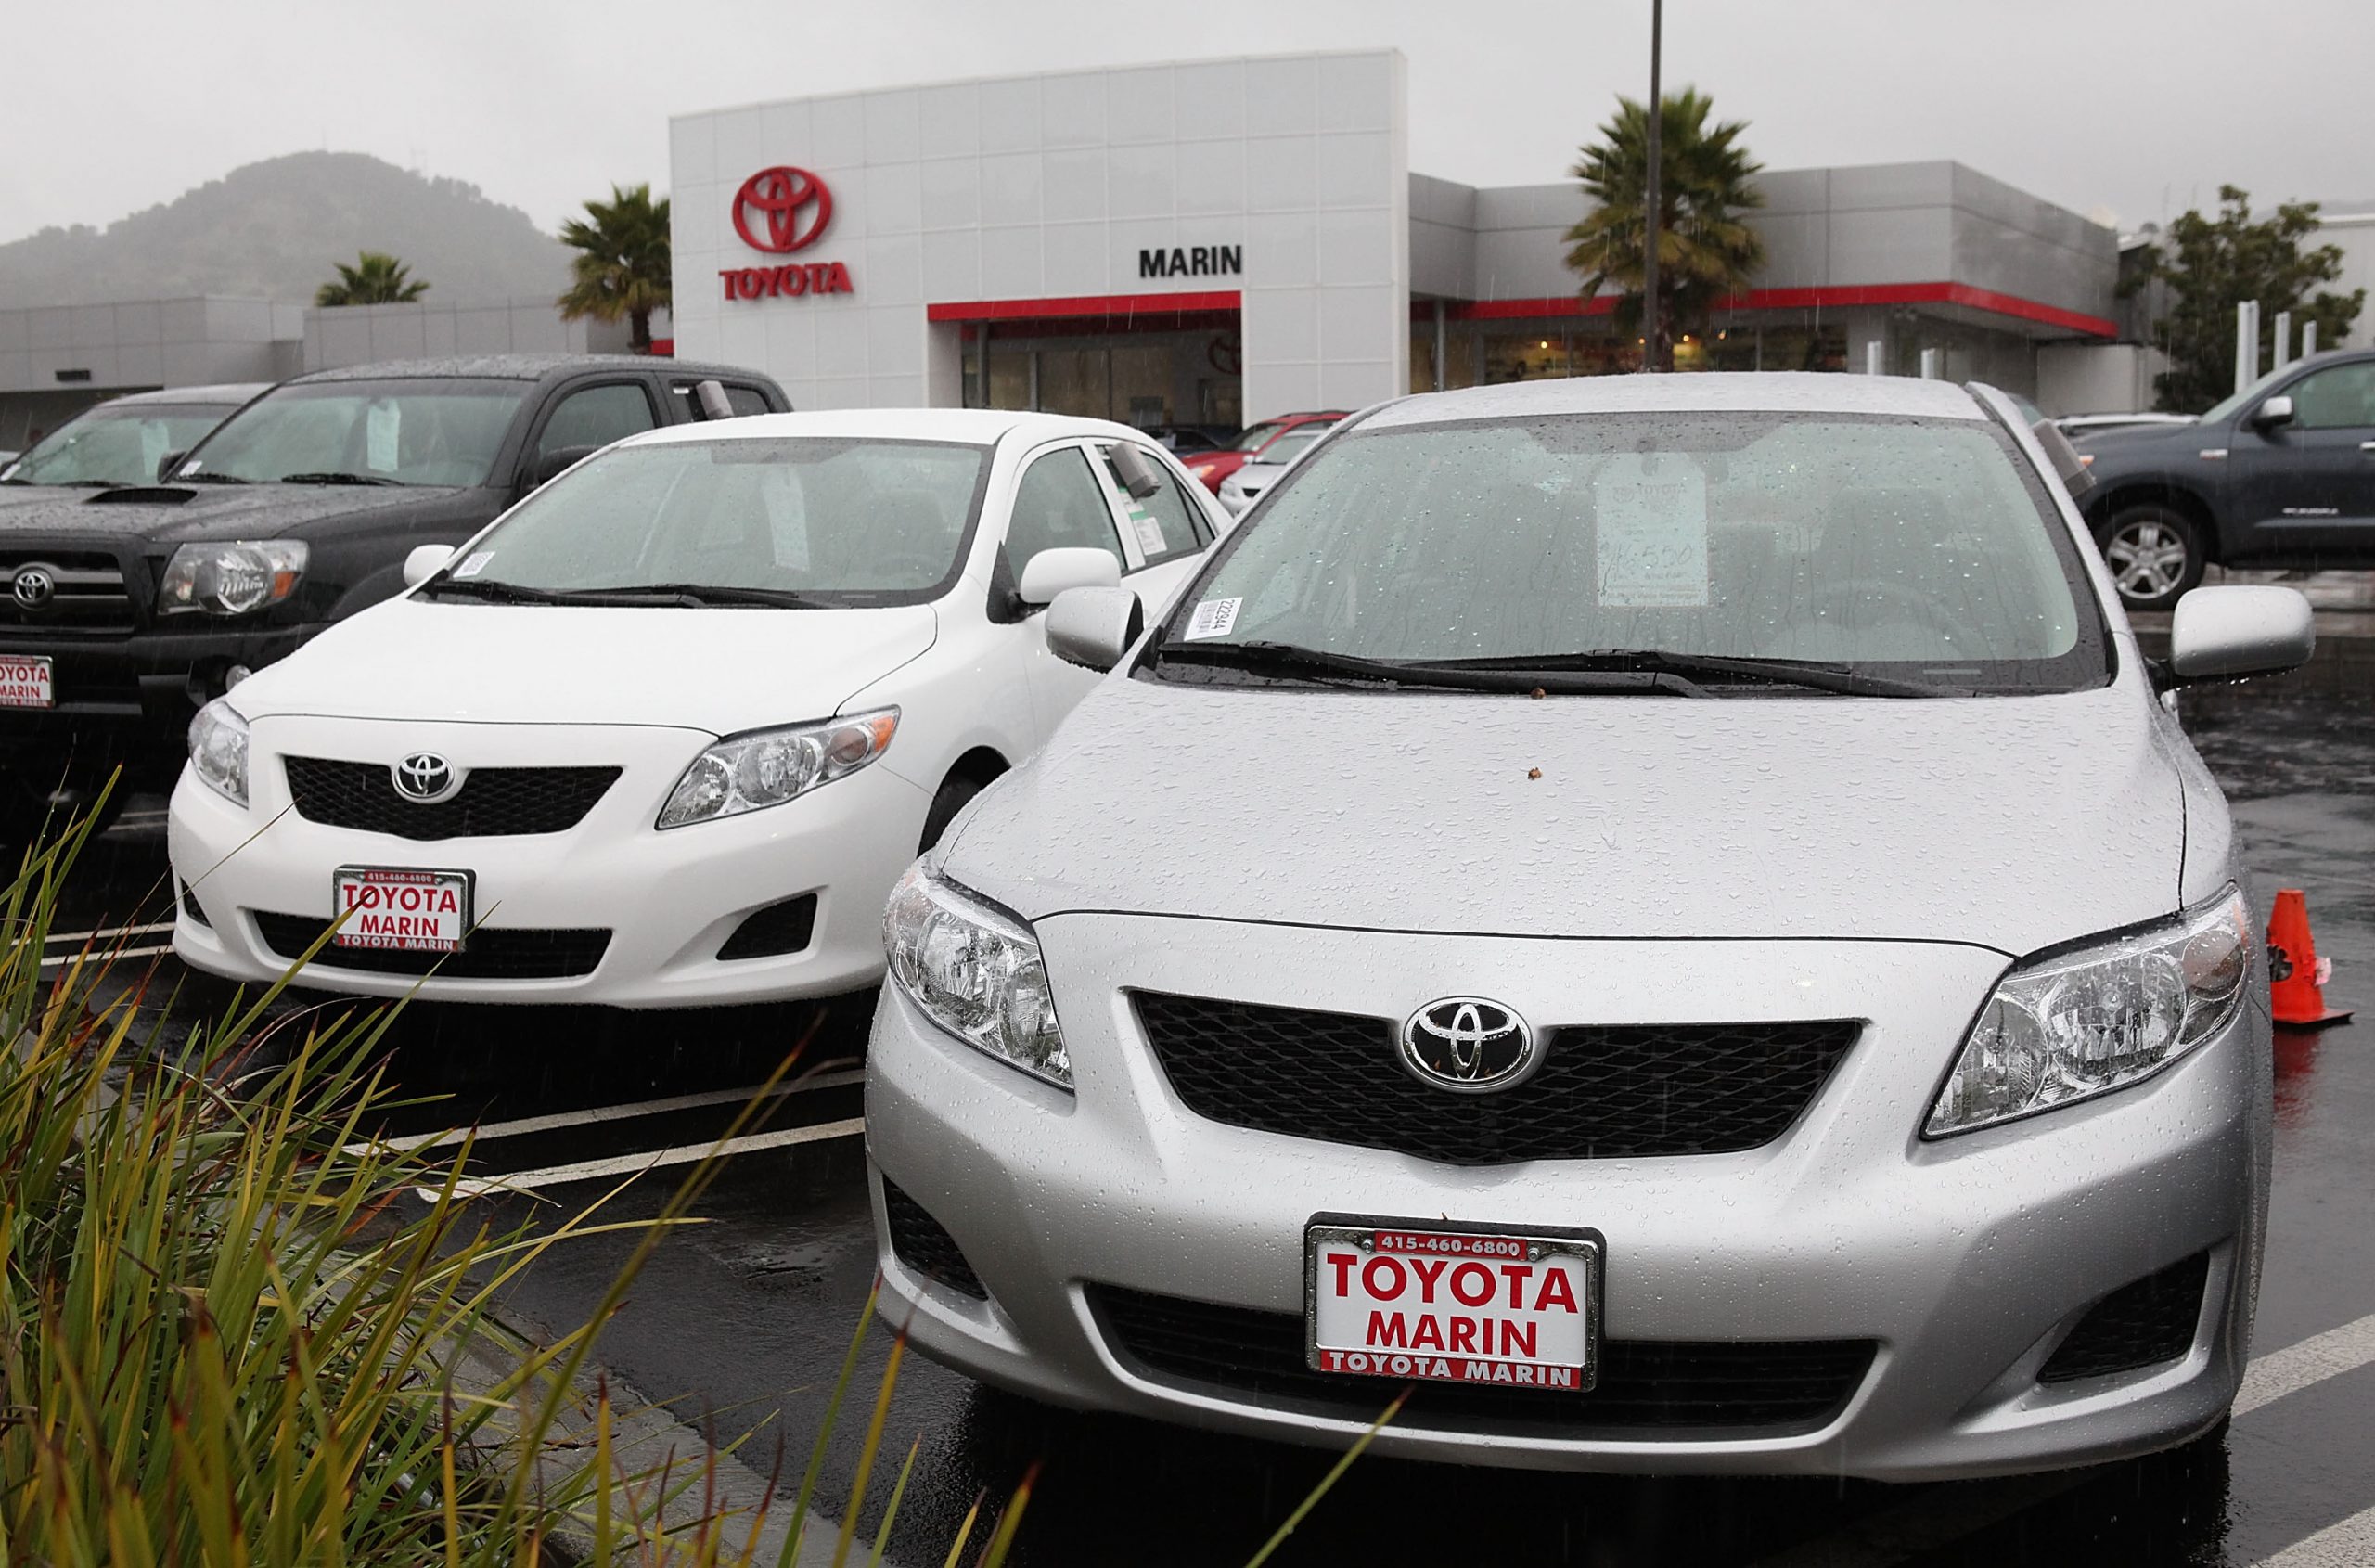 A pair of used subcompact Toyota Corolla sedans shot from the front 3/4